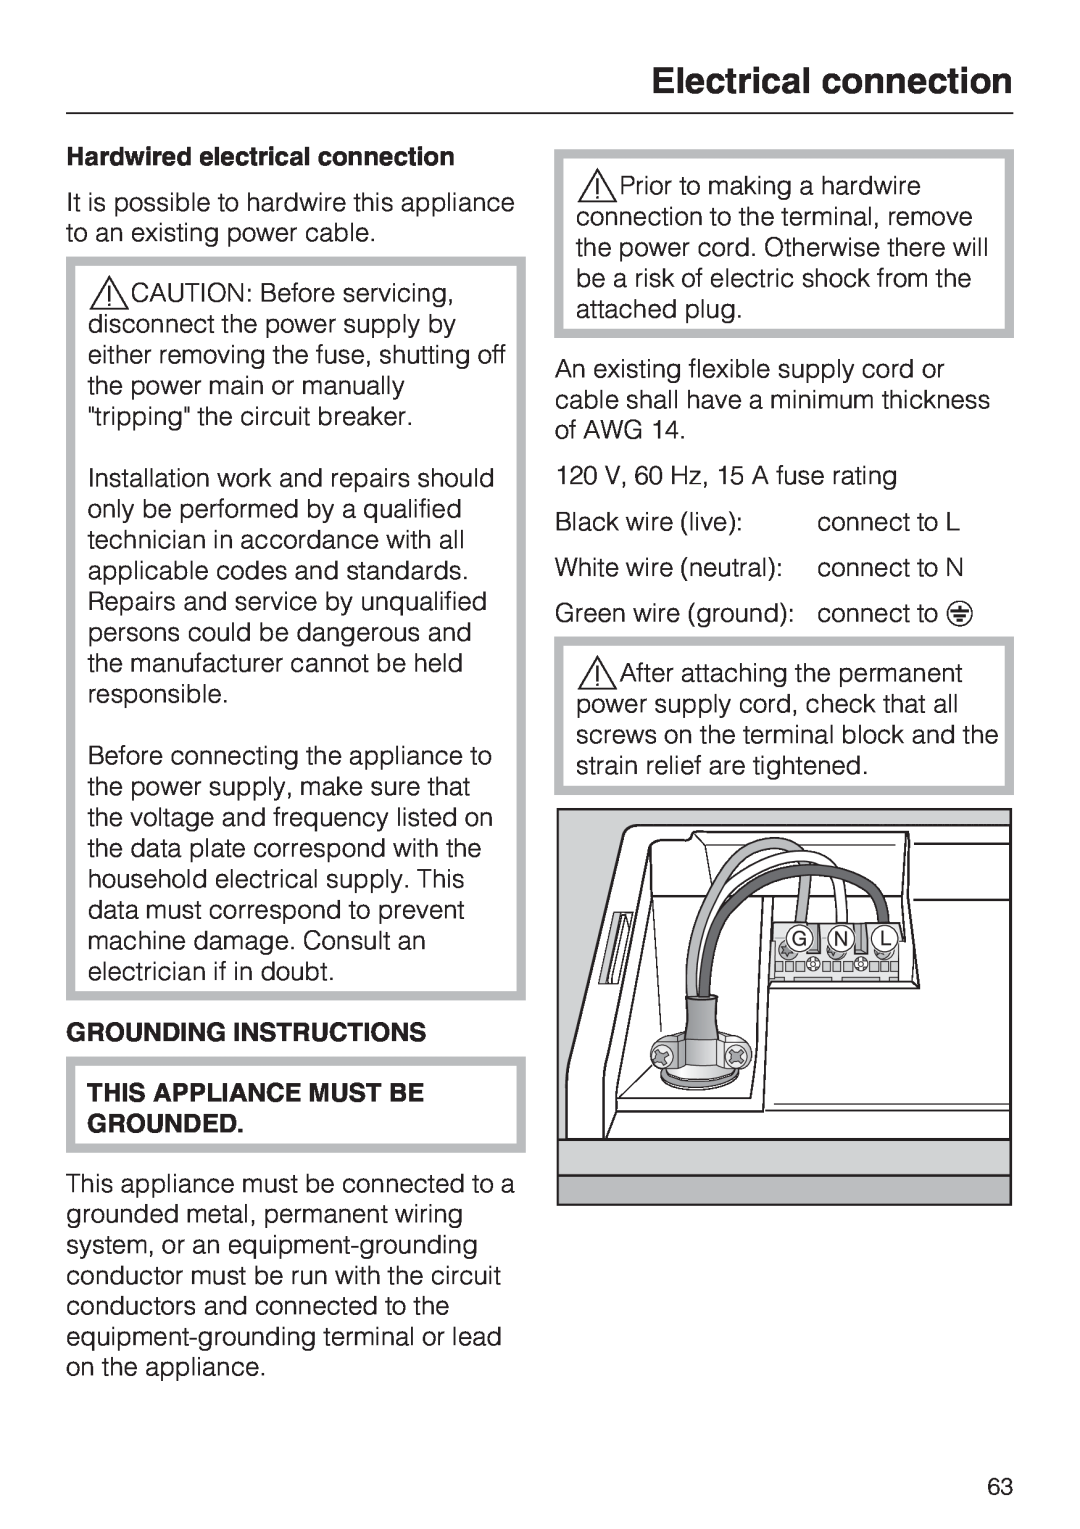 Miele G 5605, G 5600 manual Electrical connection, Hardwired electrical connection, Grounding Instructions 